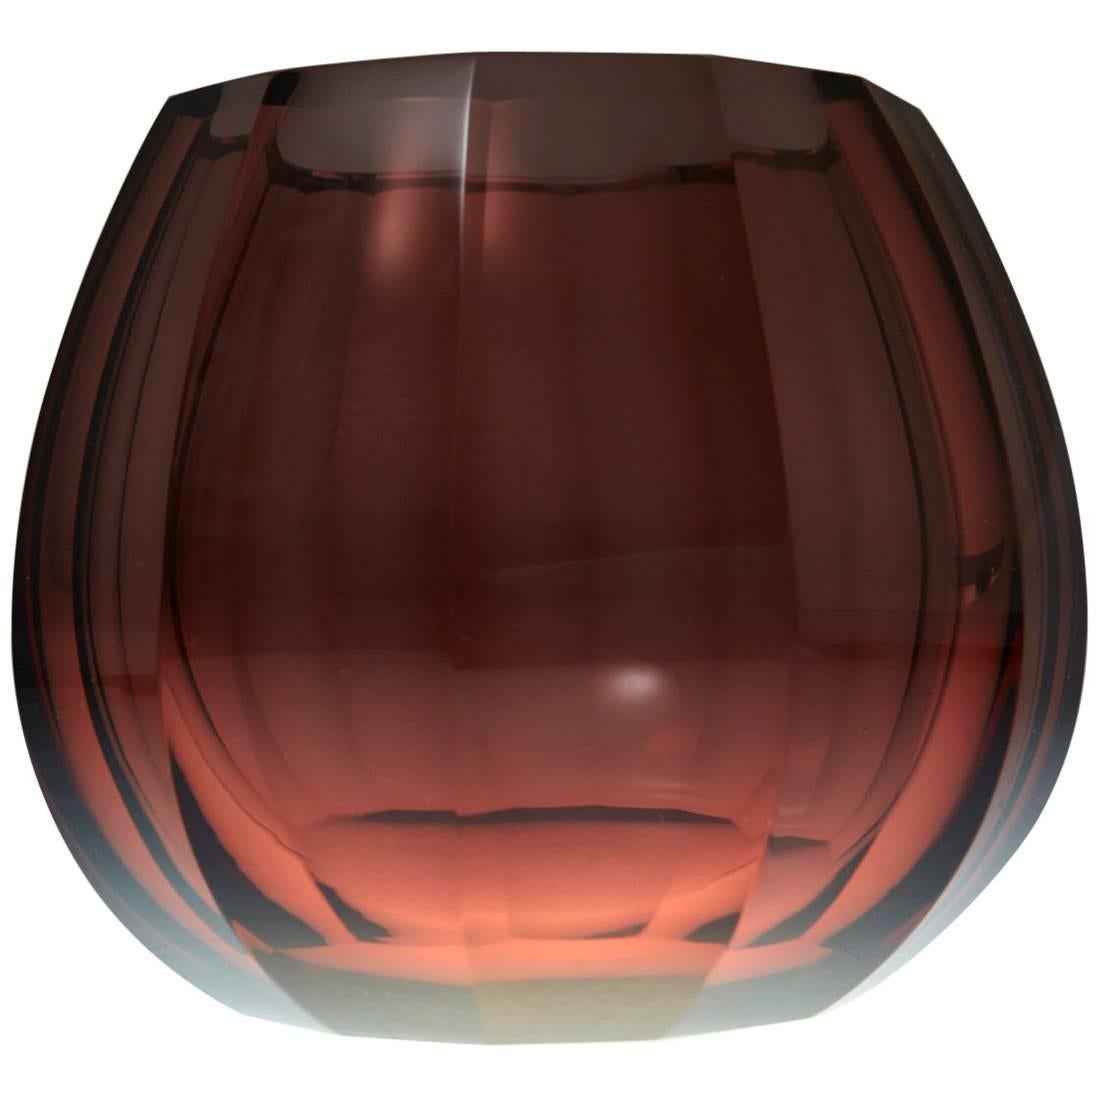 Amber Hand-Cut Crystal Vase Attributed to Josef Hoffmann Signed Moser & Söhne For Sale